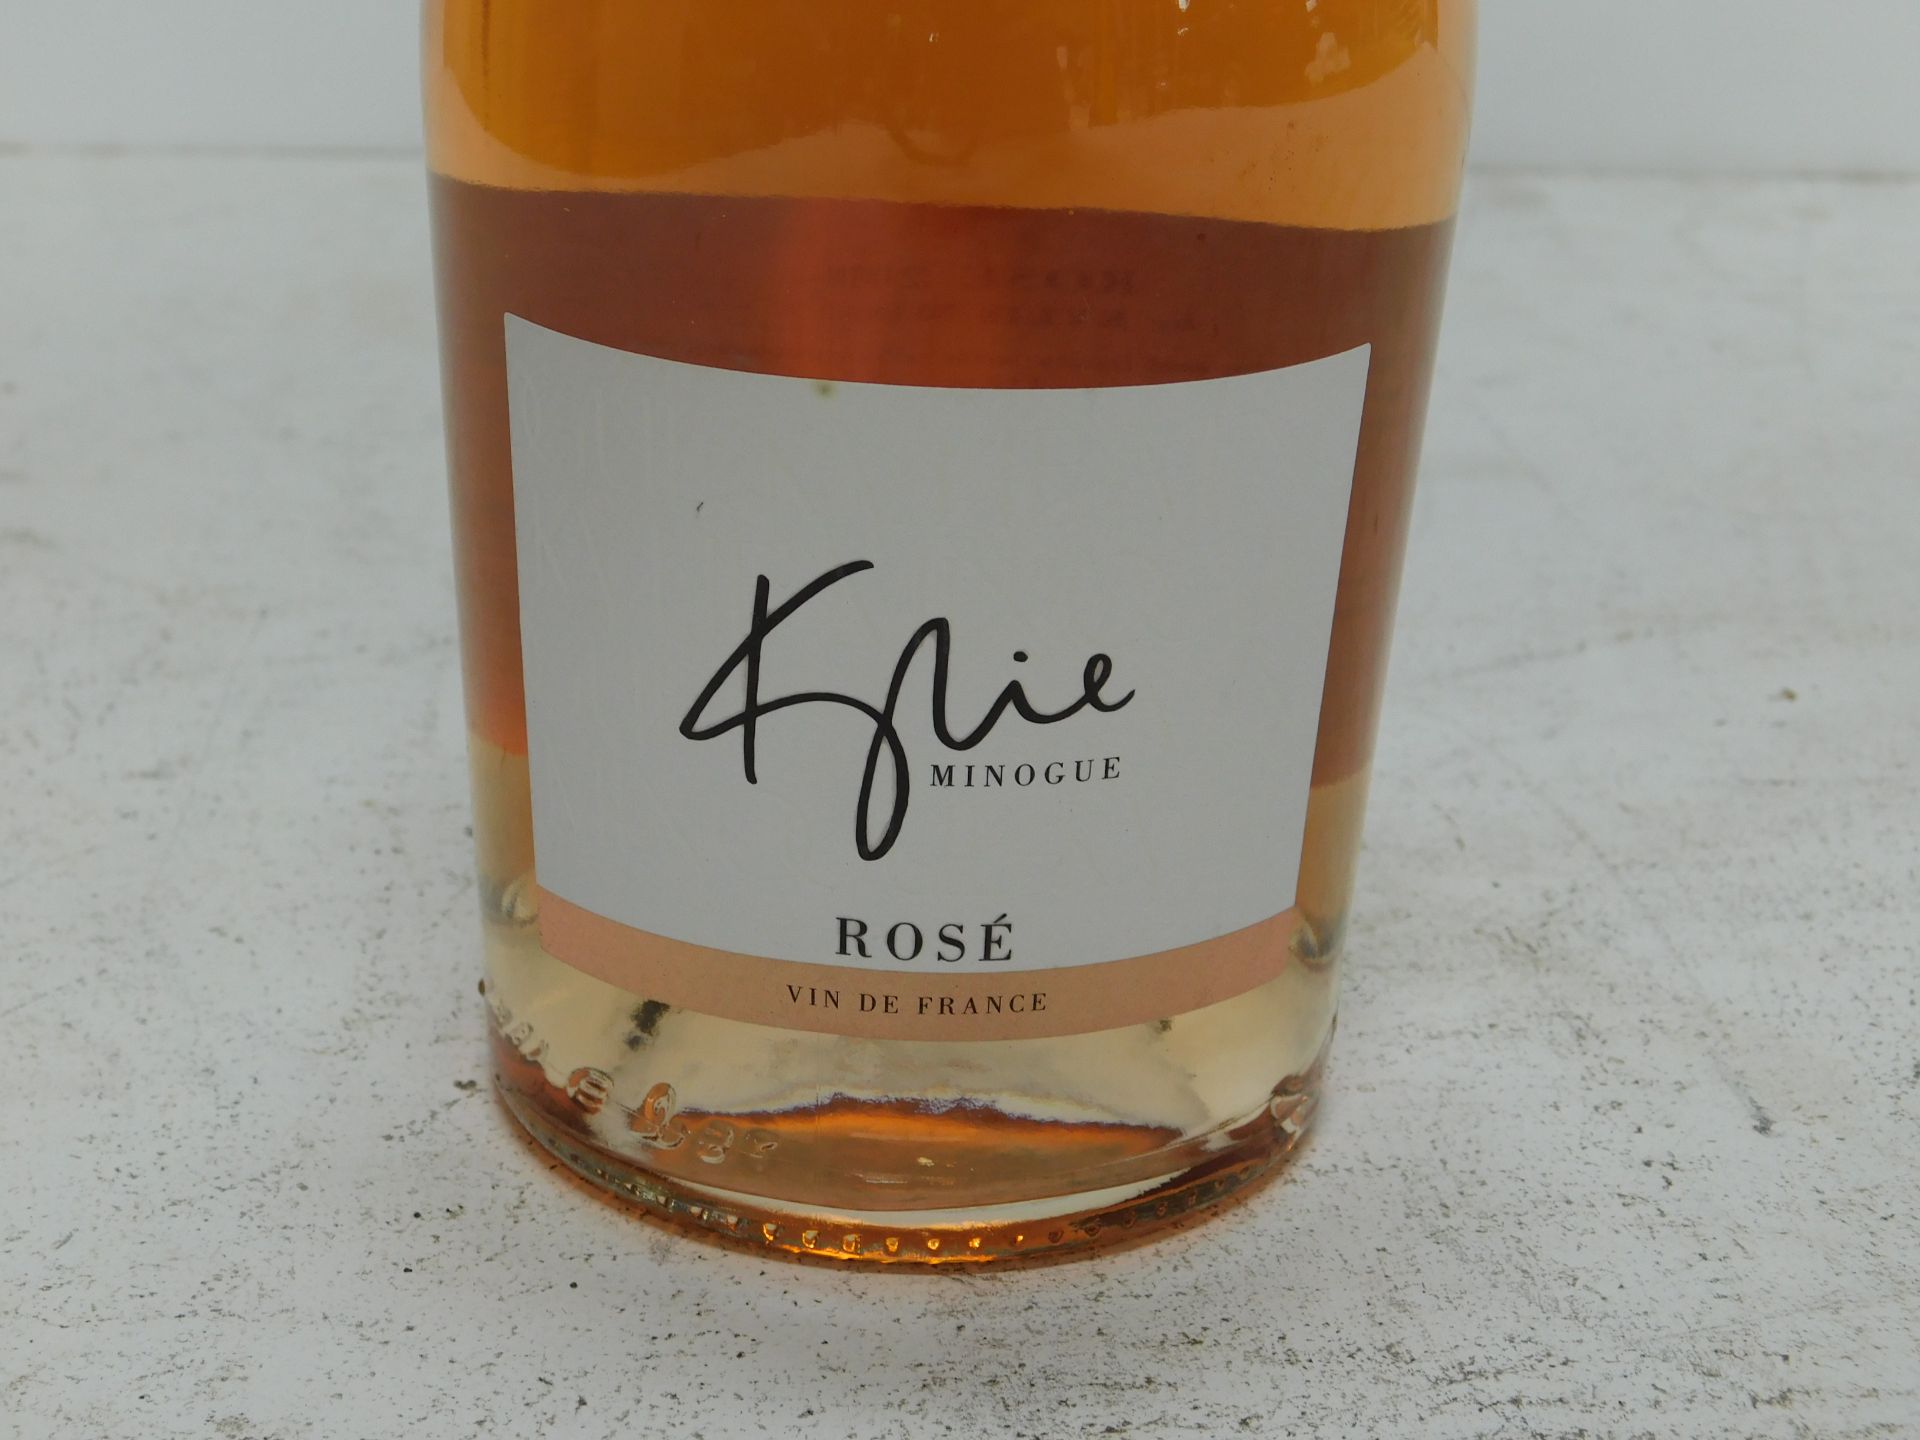 18 Kylie Minogue Vin de France Rose (Location: Brentwood. Please Refer to General Notes) - Image 2 of 2